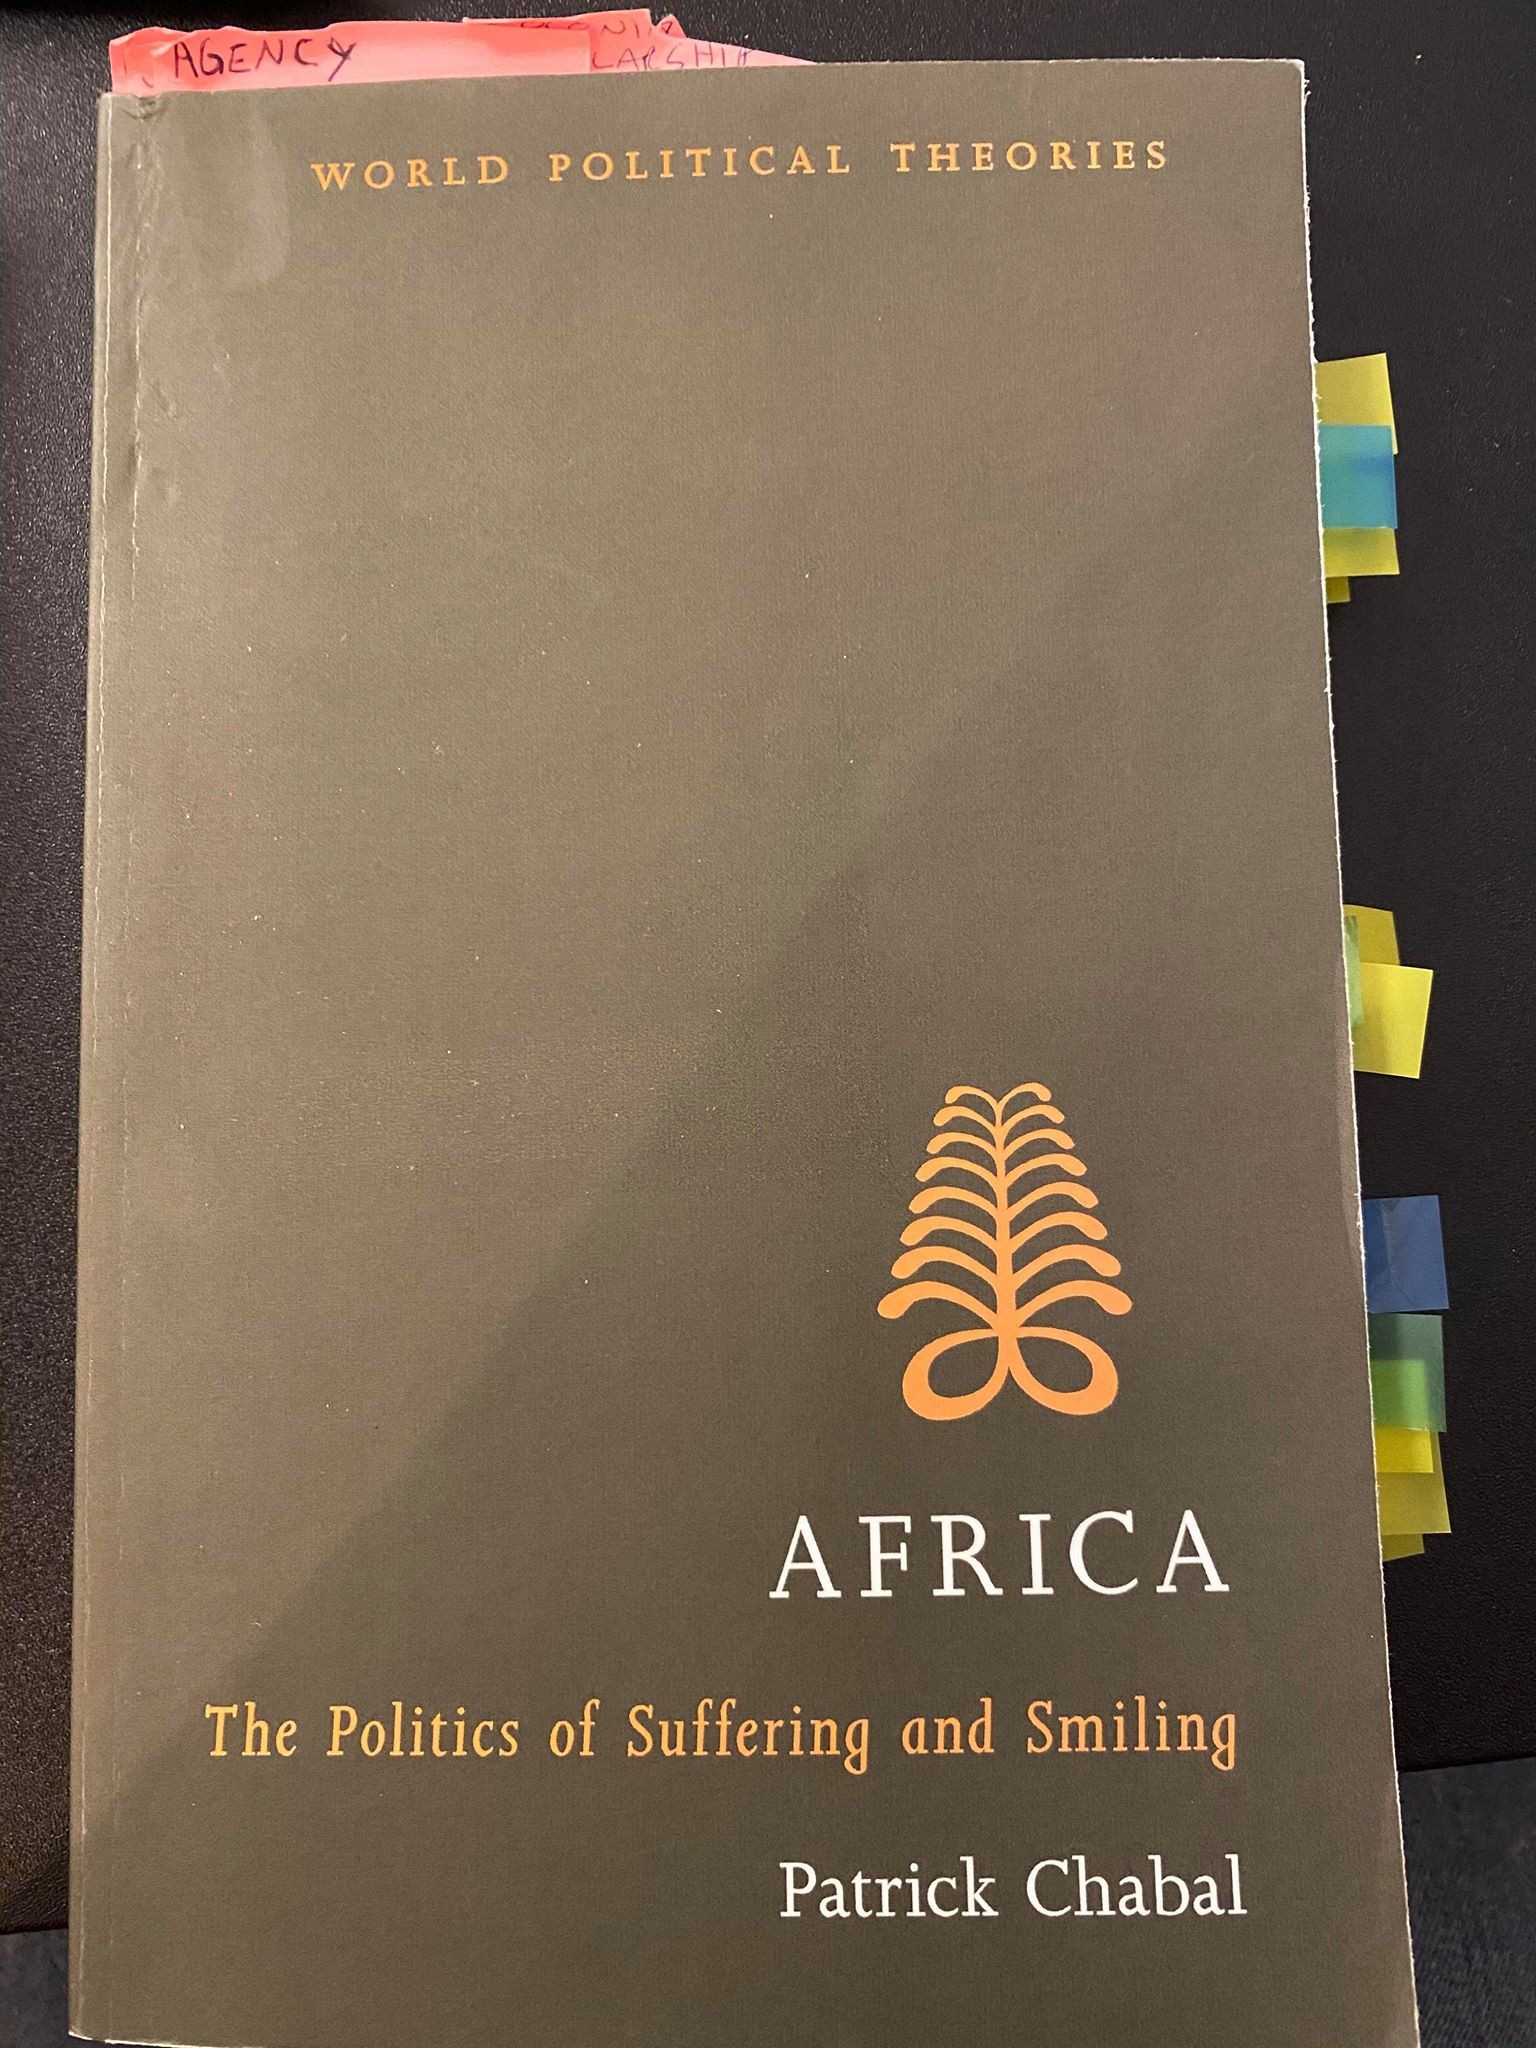 Africa - The Politics of Suffering and Smiling 